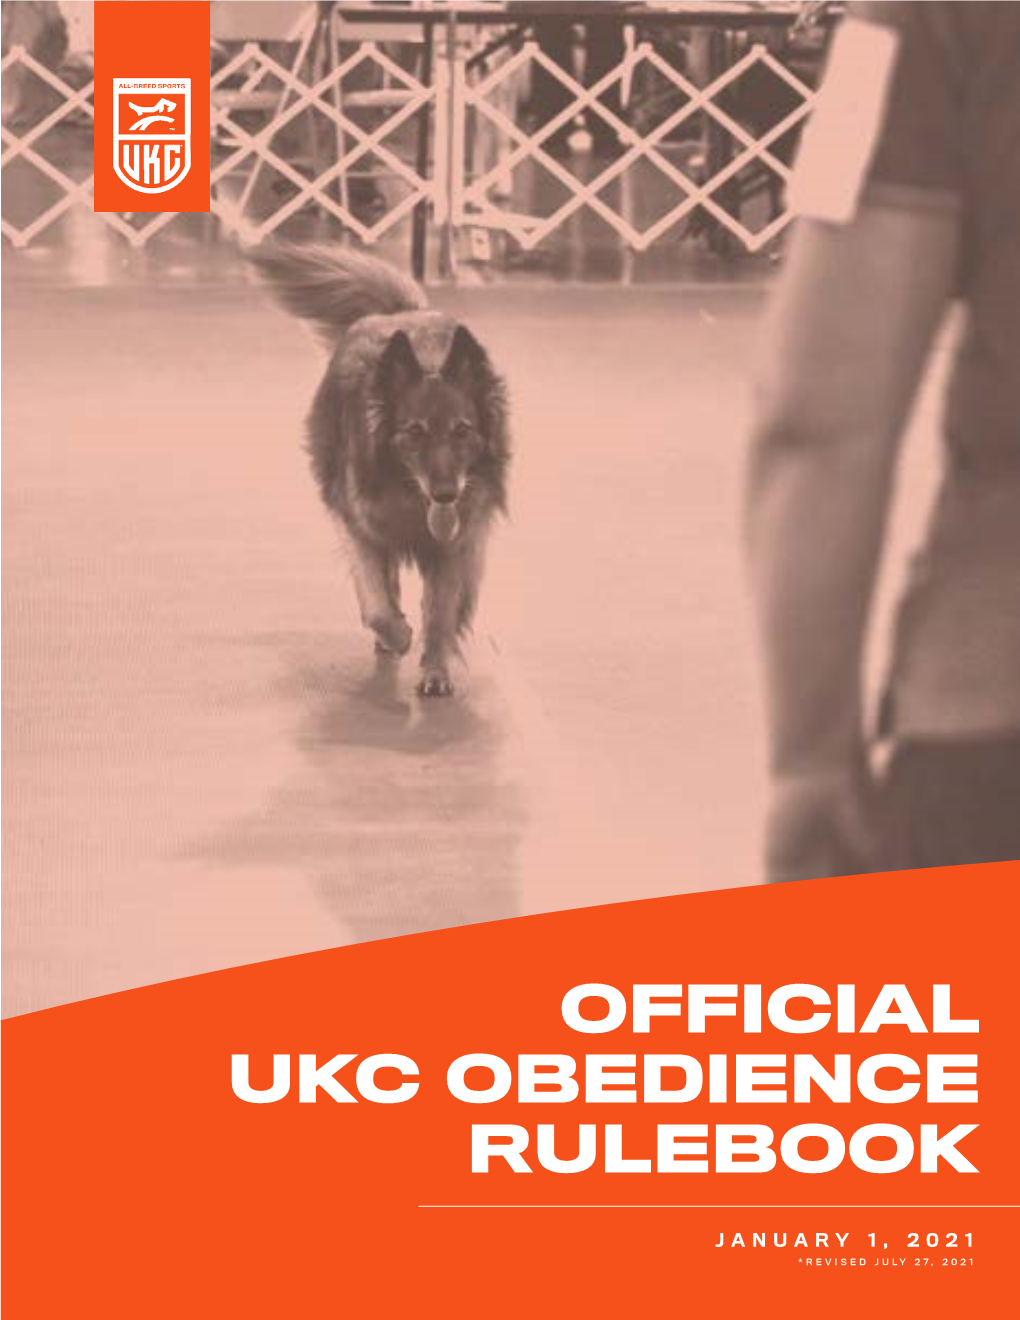 Official Ukc Obedience Rulebook